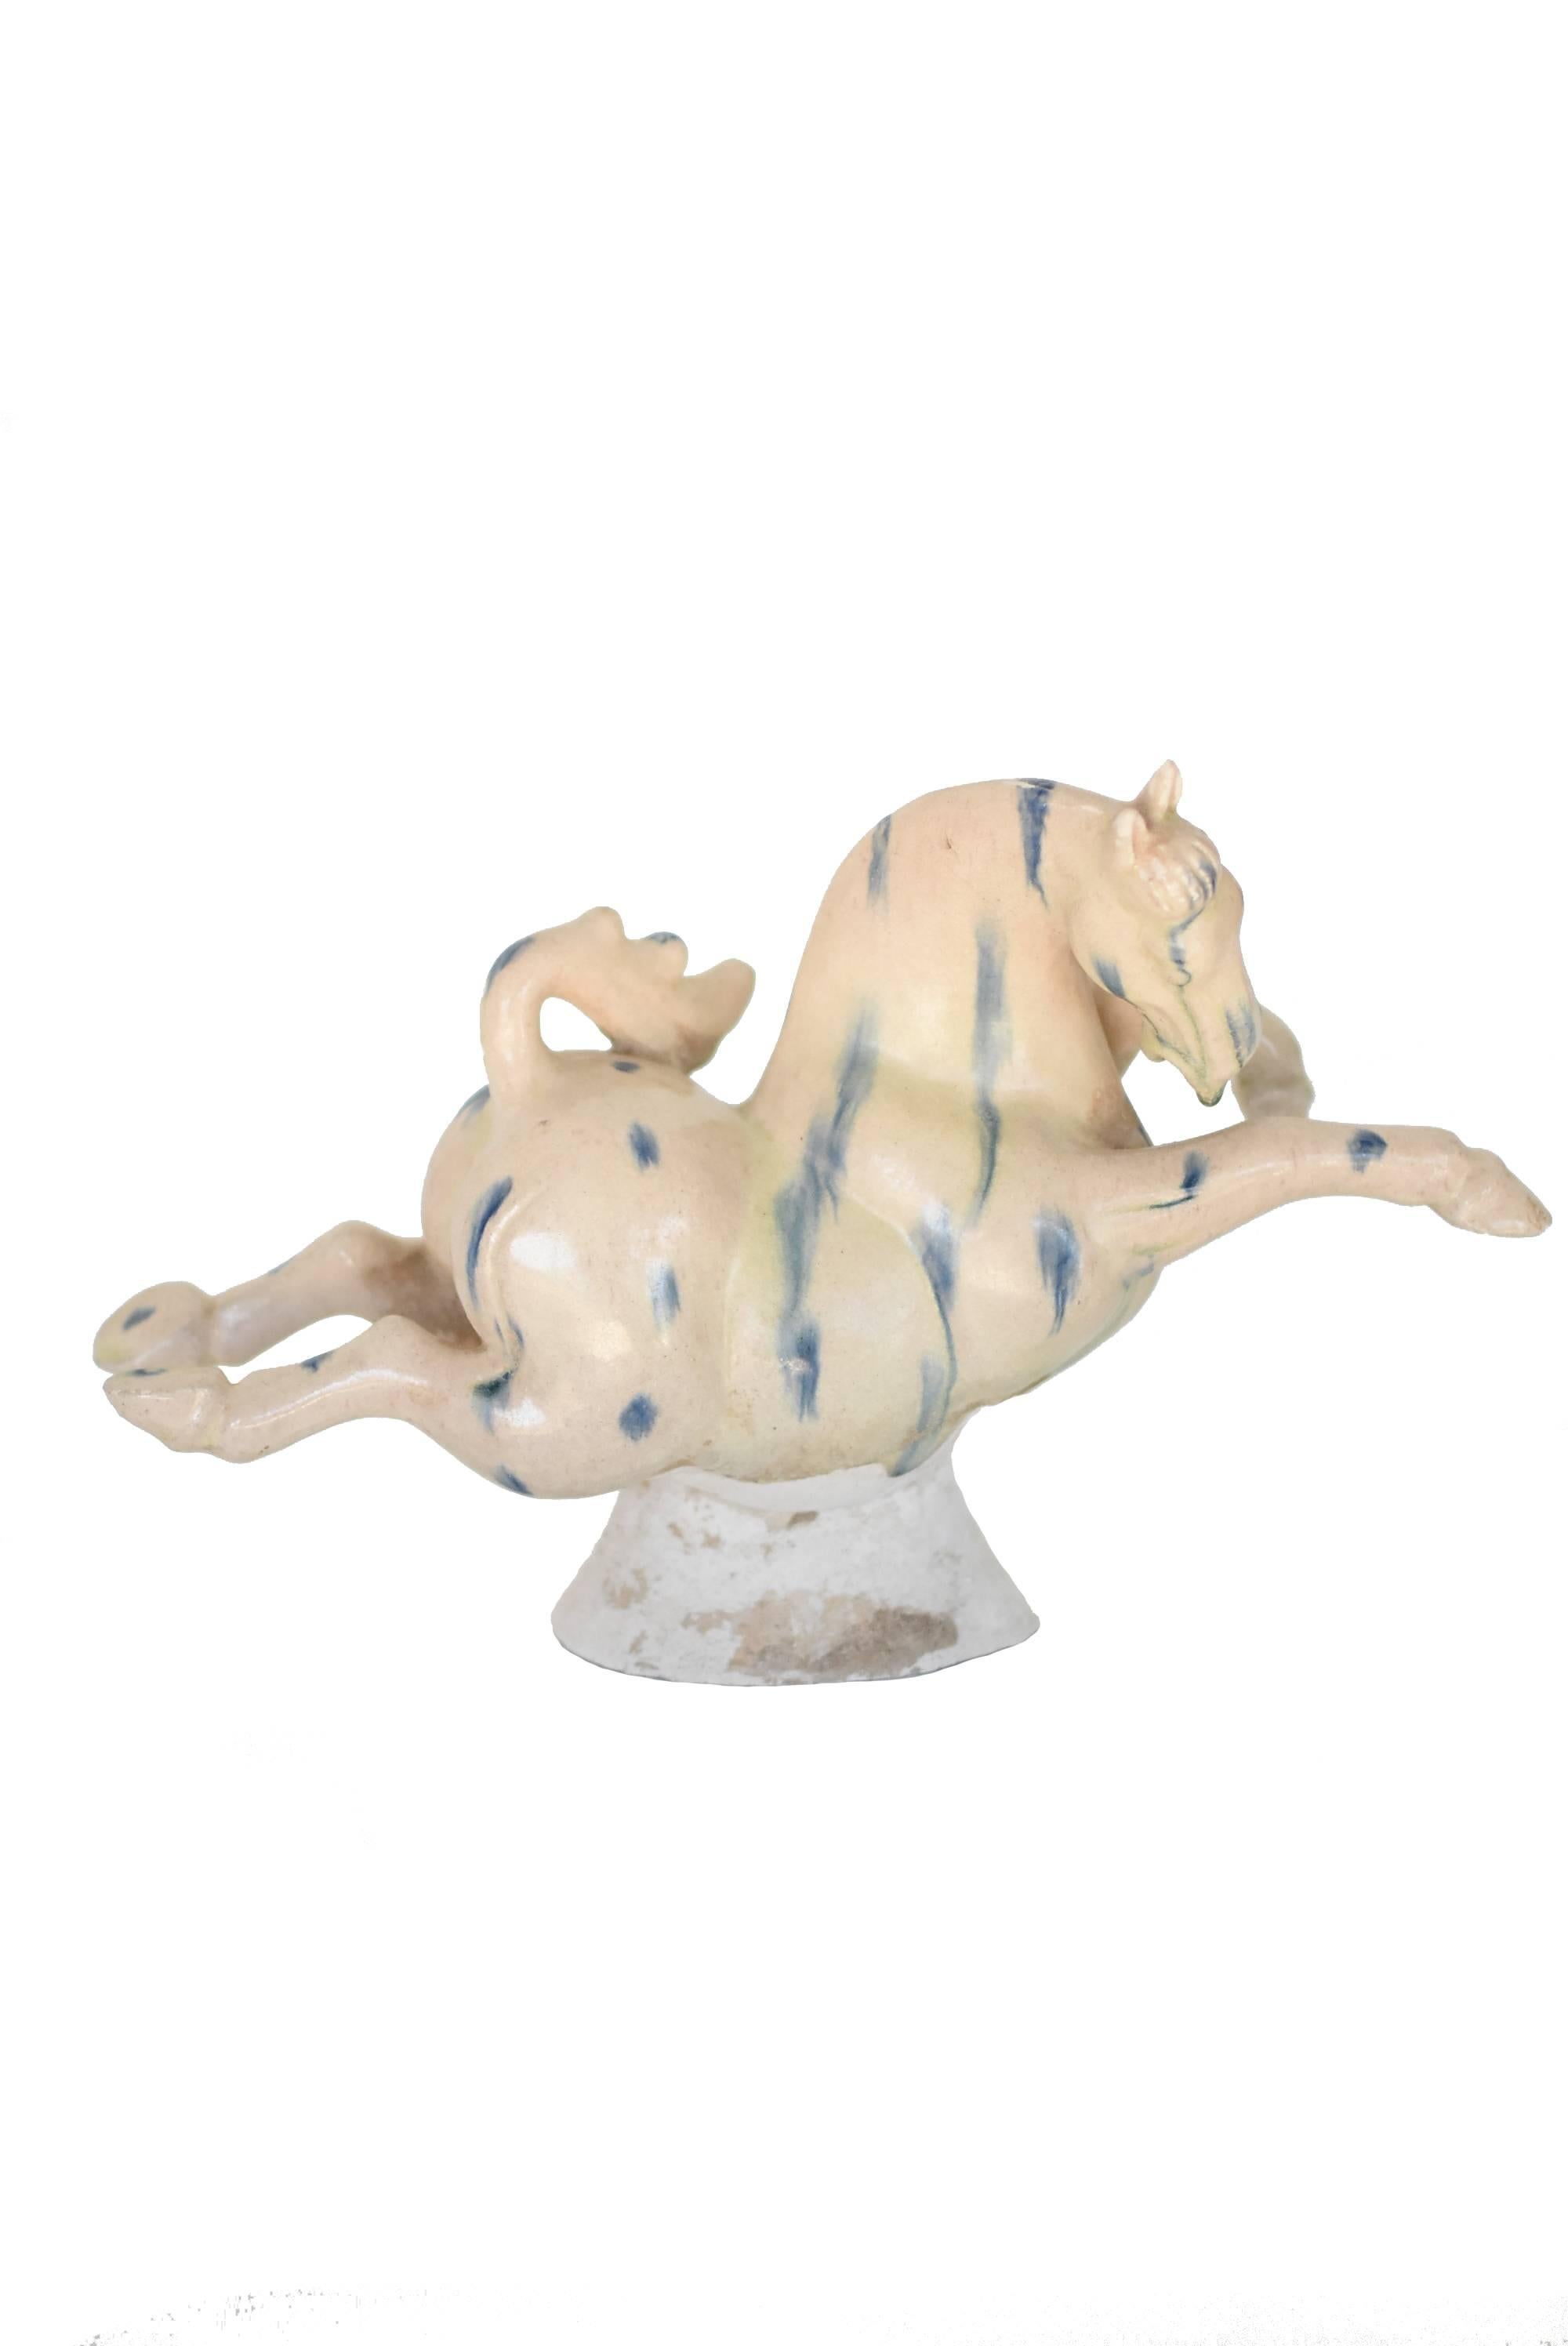 Set of 4 Large Pottery Horses, Chinese Terracotta with Blue Streaks 7